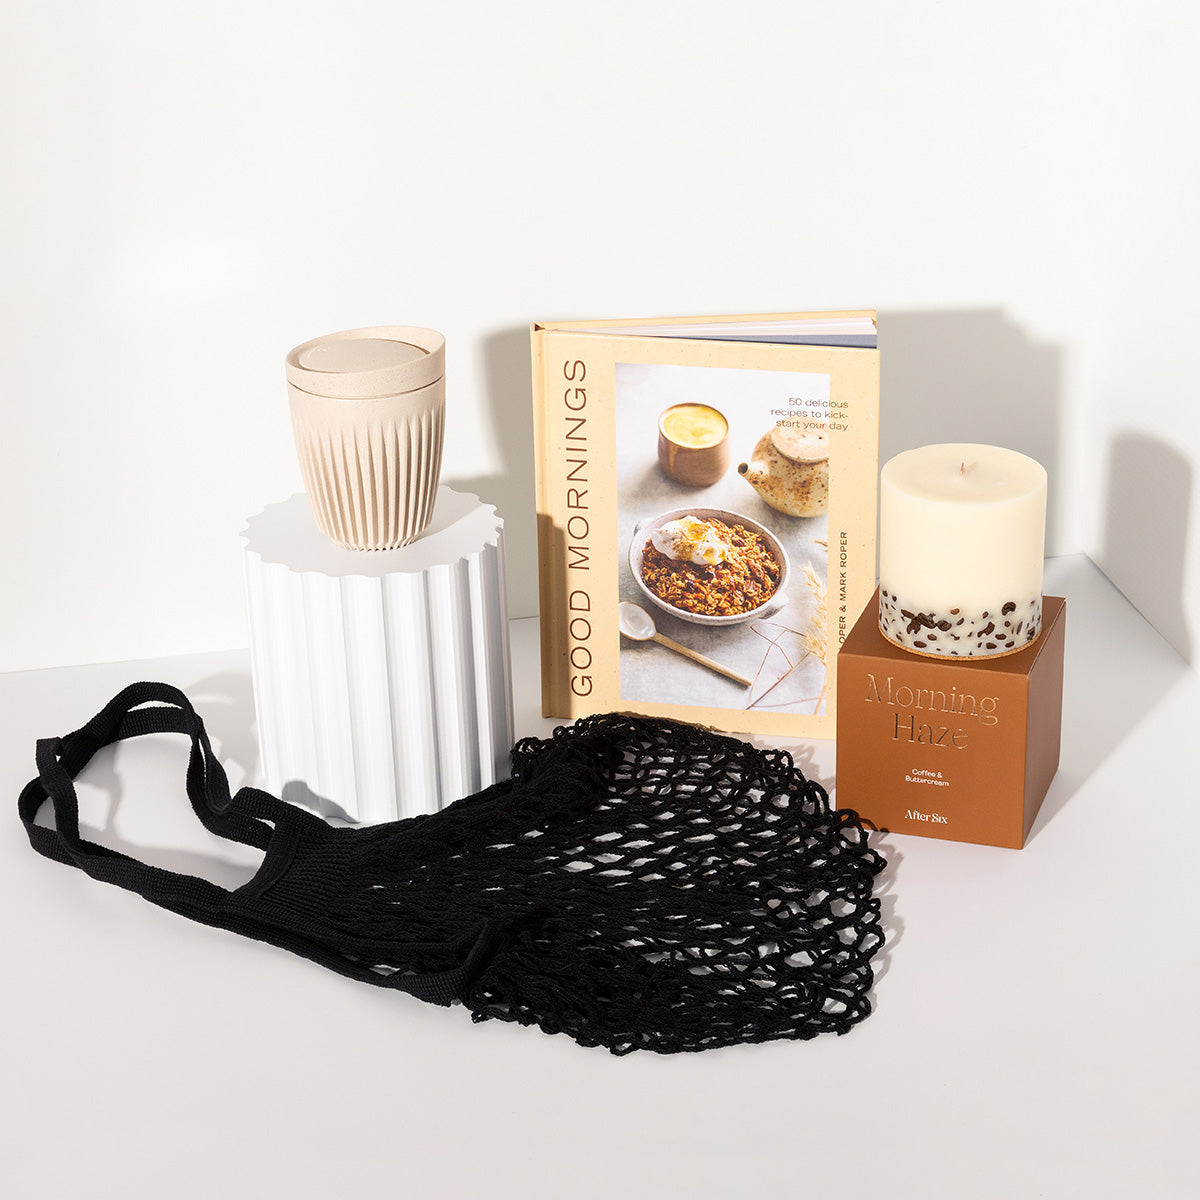 Bespoke Lane and co gift hampers Brisbane Australia Corporate Gifting delivery  australia wide Early Bird shopping net bag candle morning haze after six good mornings book coffee cup 